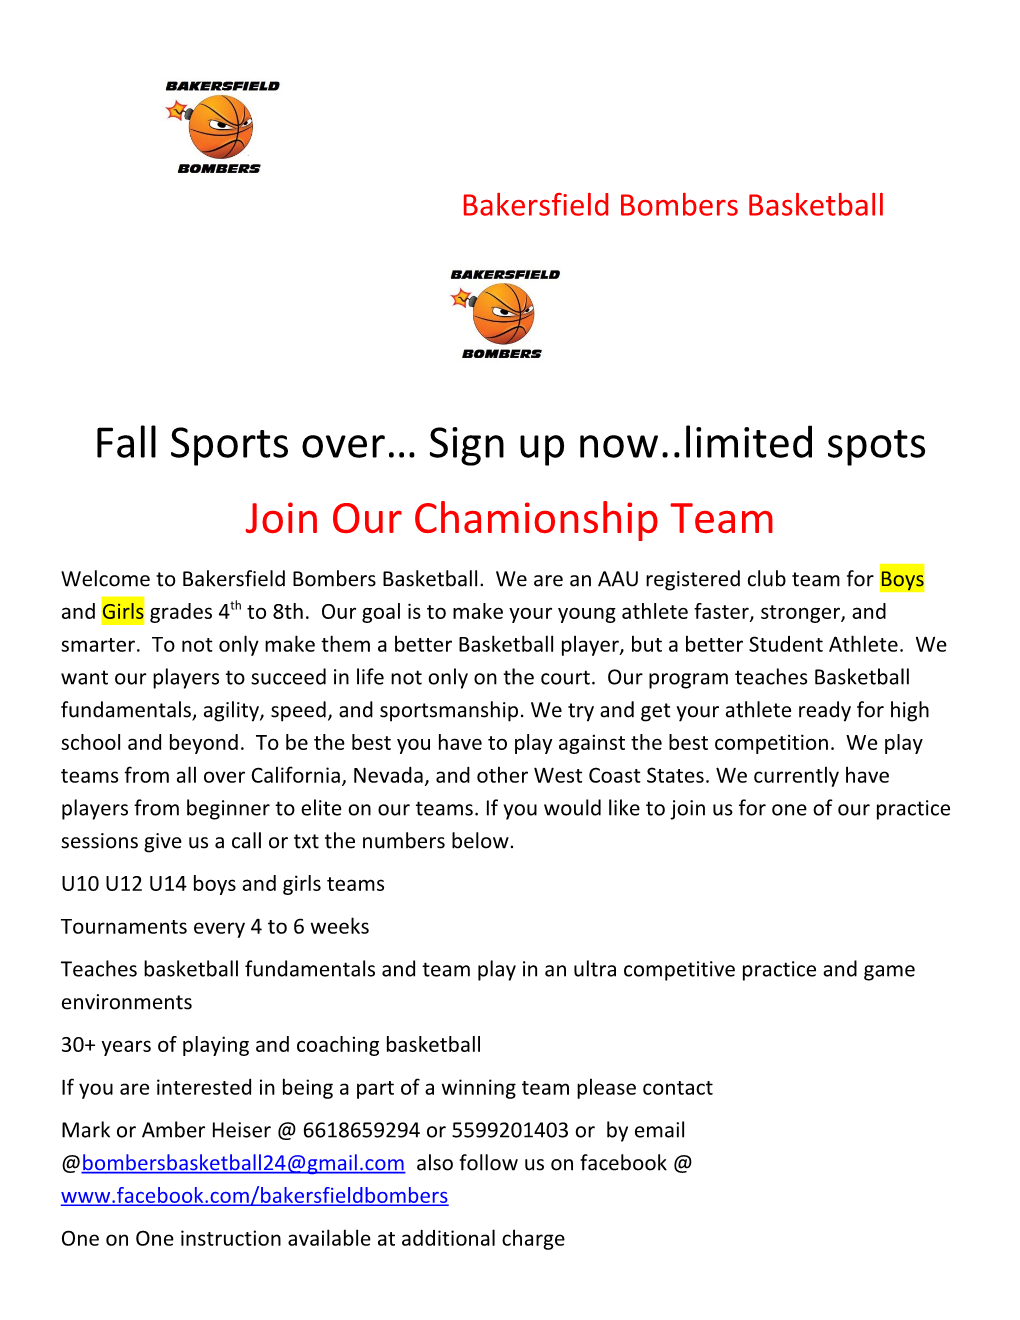 Fall Sports Over Sign up Now Limited Spots